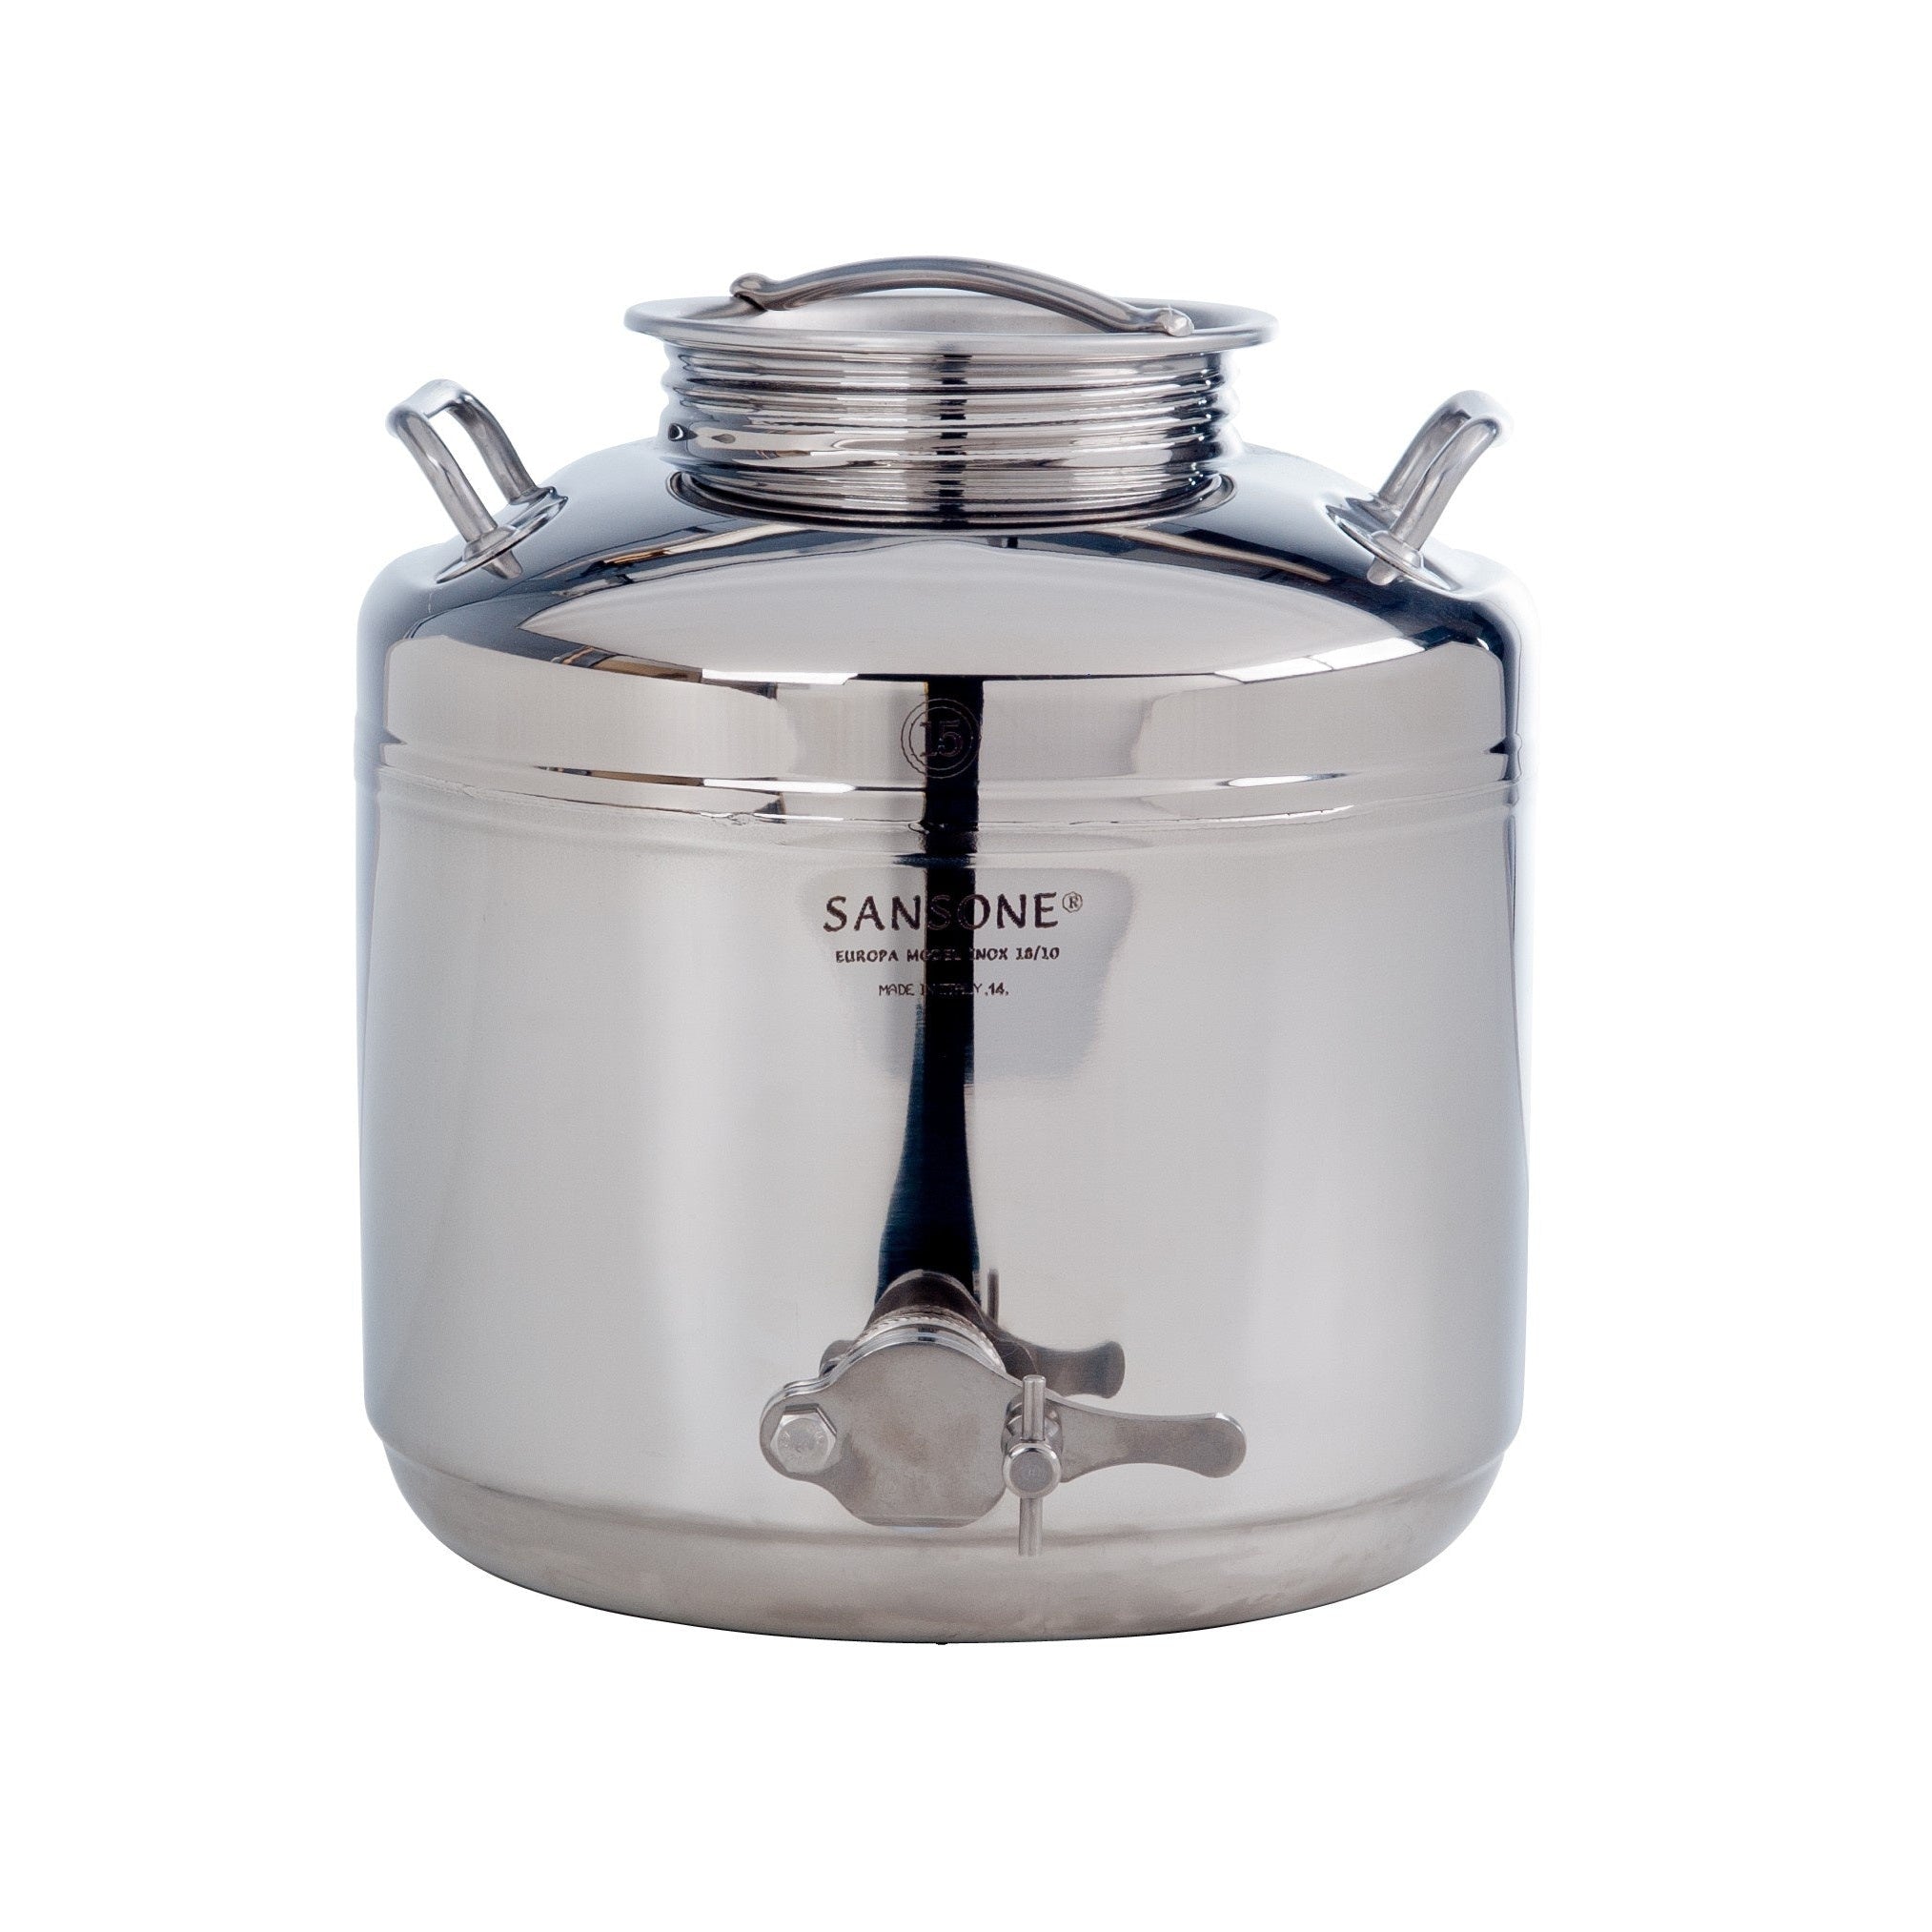 Sansone 15L/3.96 gal Honey Dispenser 18/10 Stainless Steel Canister - NSF Certified with Steel Spigot – Made in Italy